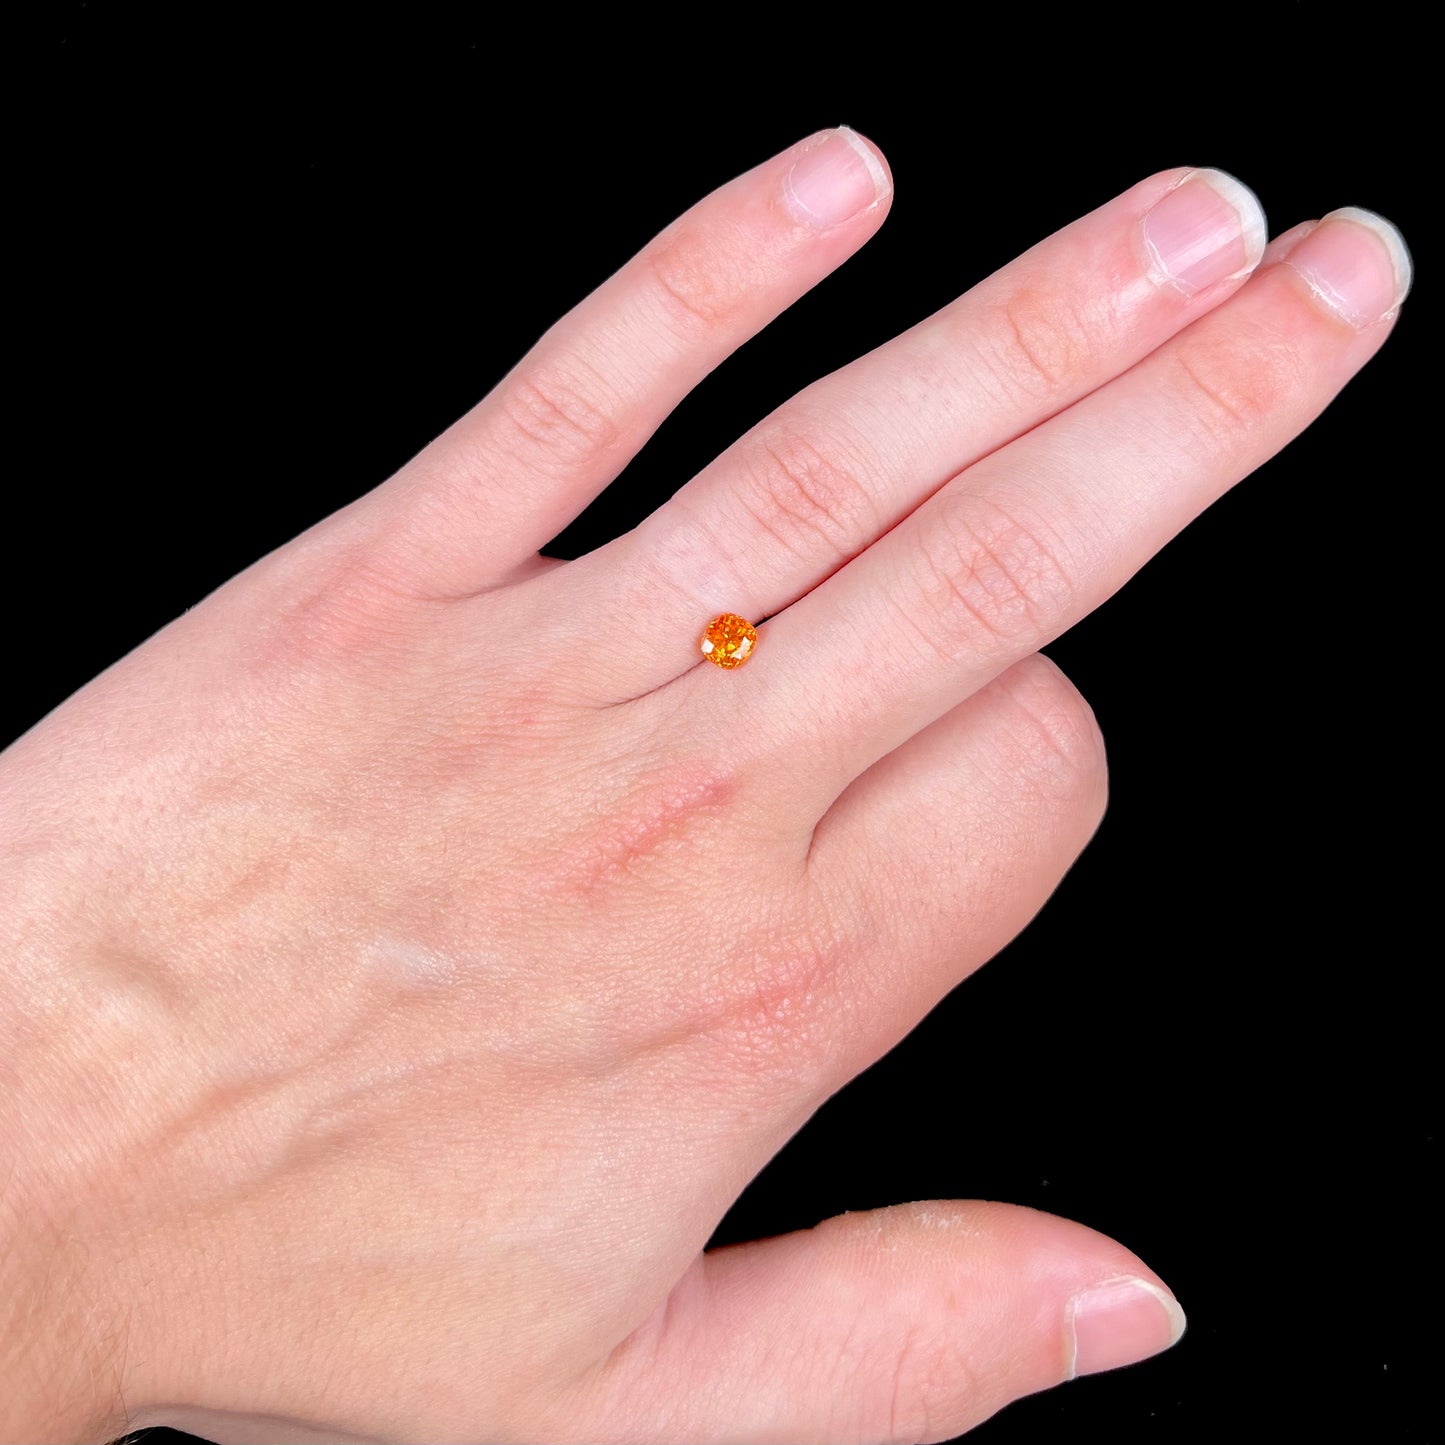 A faceted cushion cut natural orange sapphire gemstone.  The stone is cut to enhance the orange color.